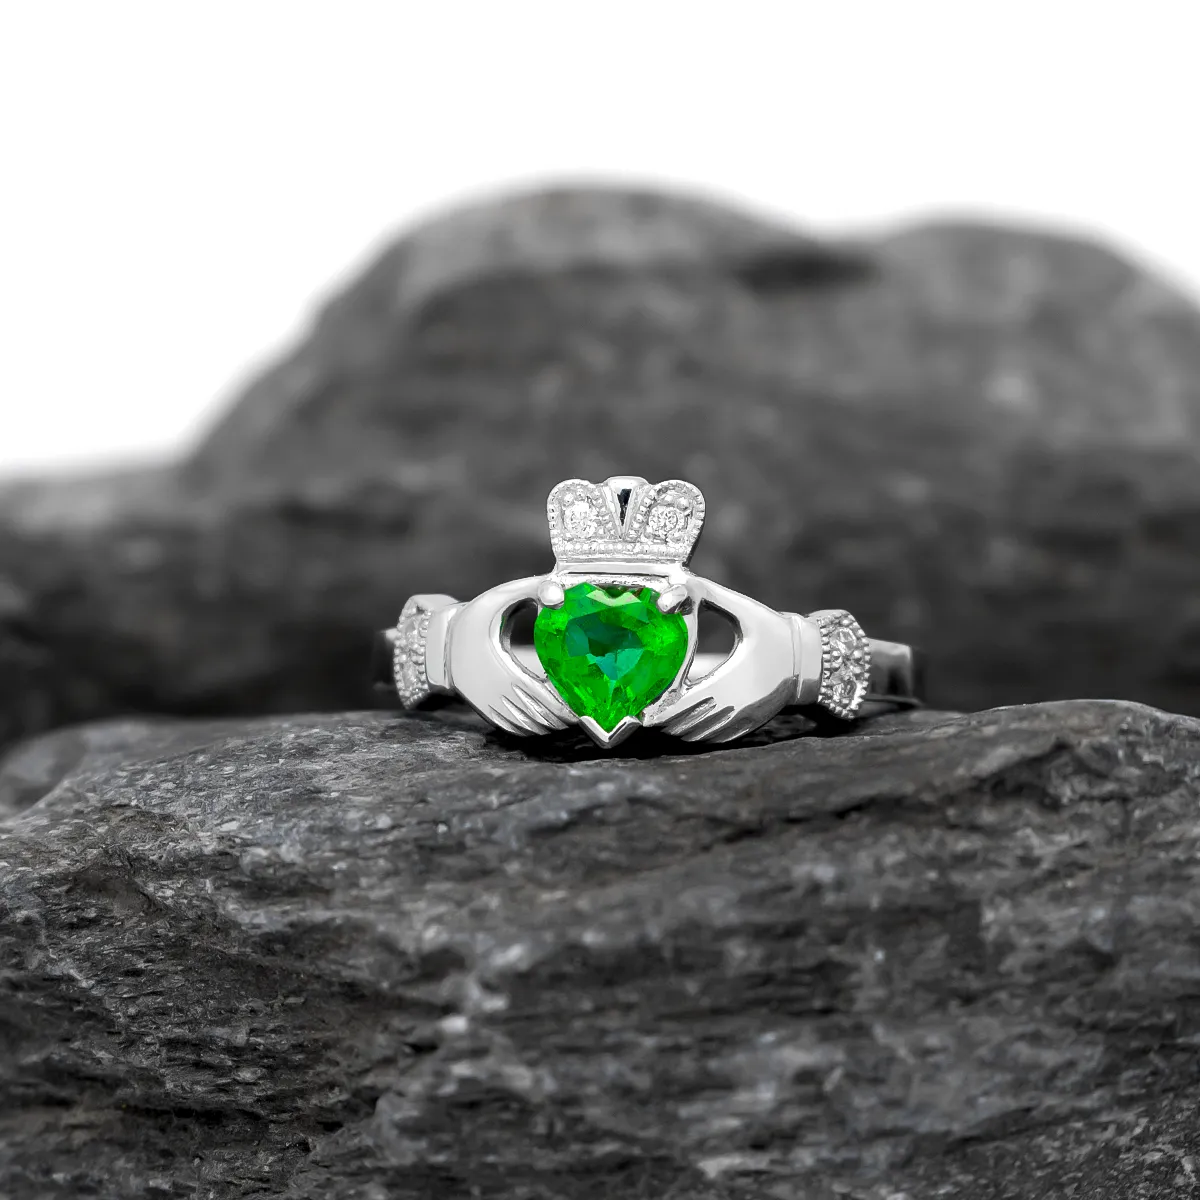 Elegantly Designed Claddagh Ring Featuring A Glistening Heart-shaped E...